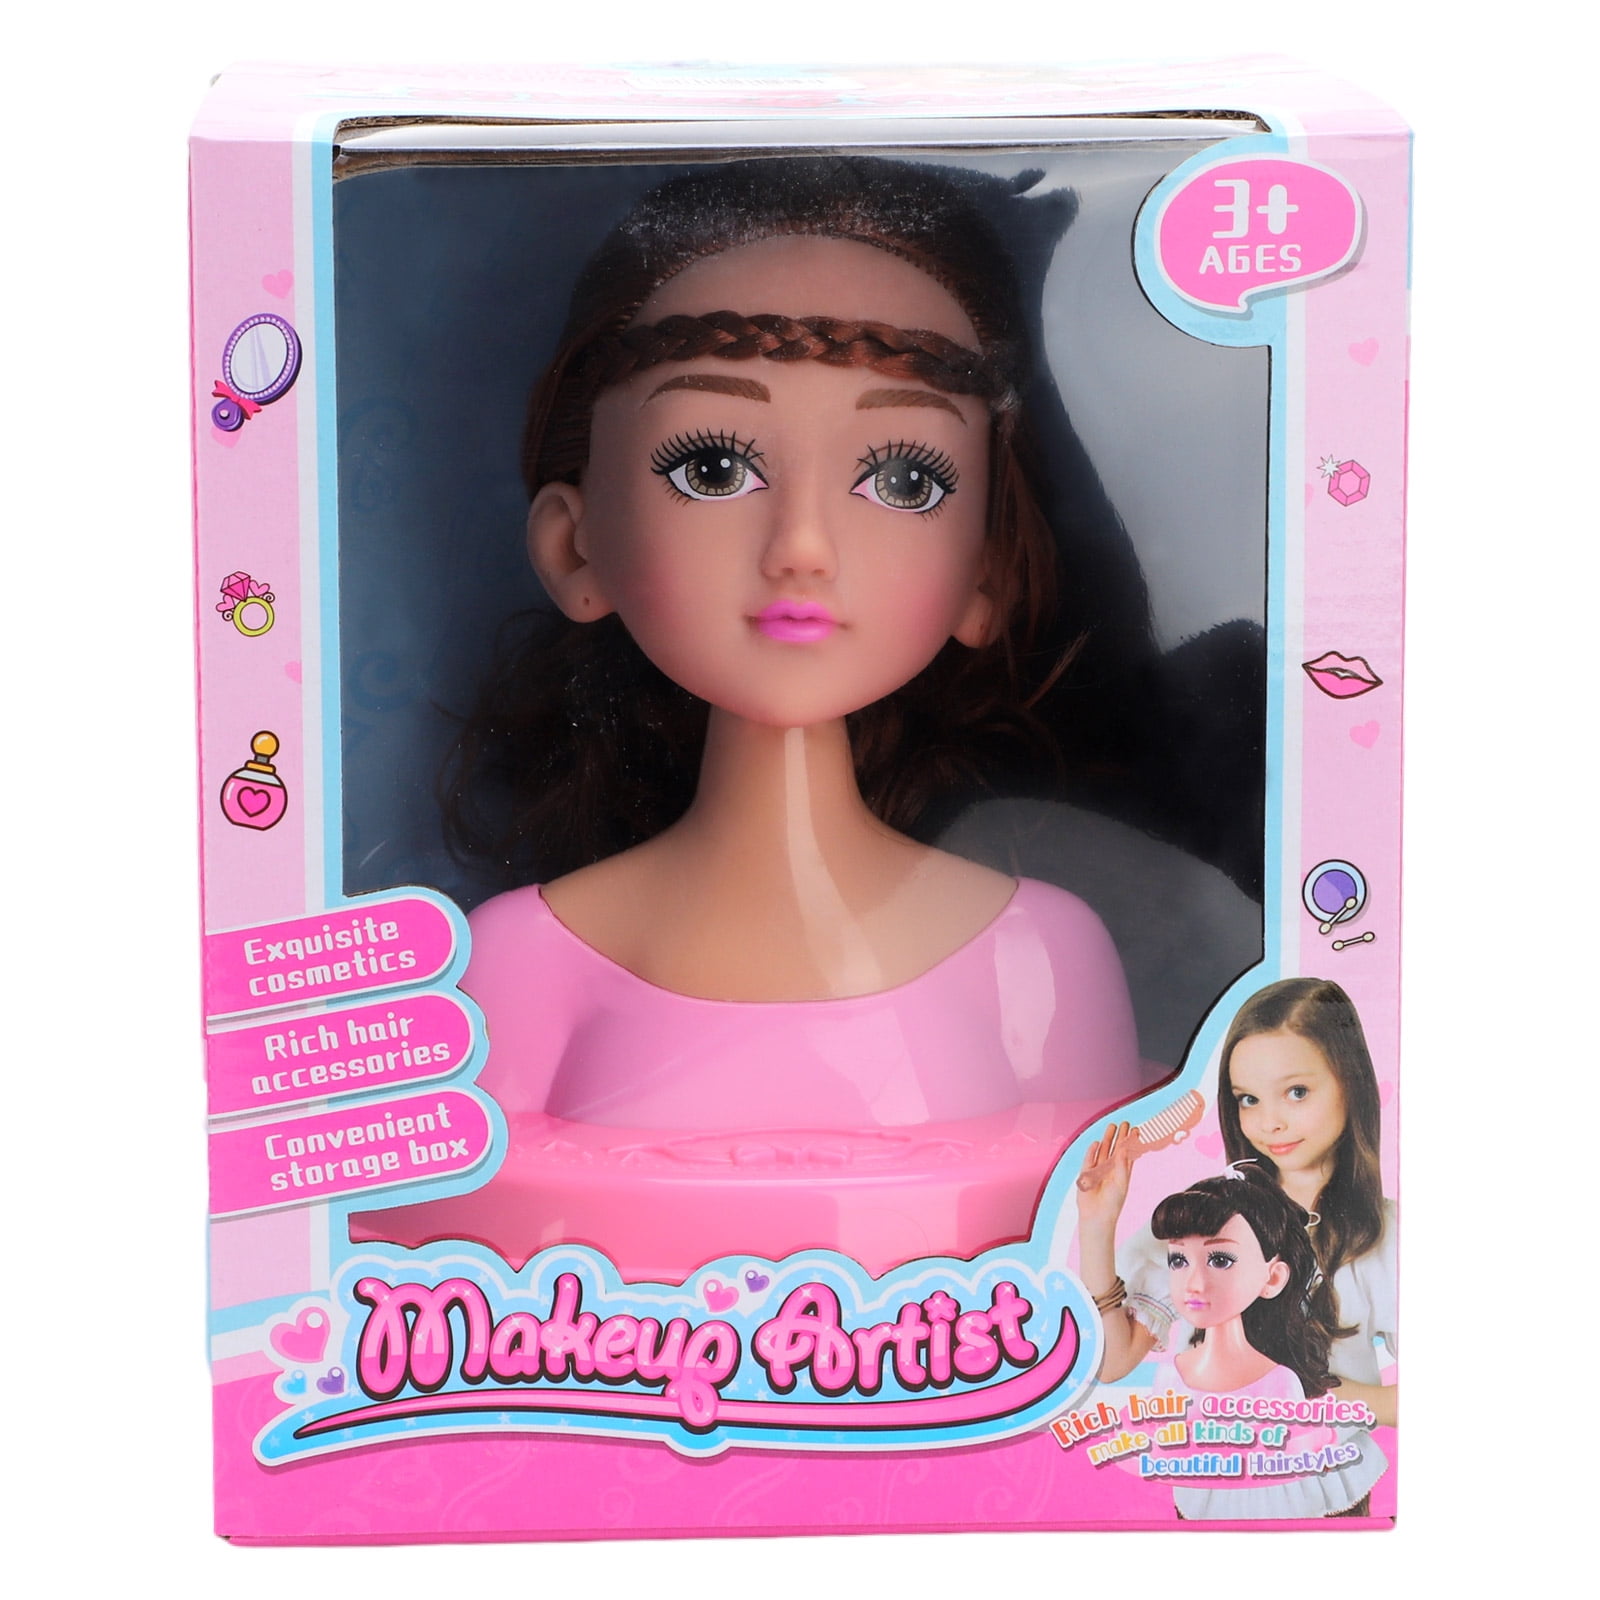 Barbiecore Beauty Doll Set With Makeup, Comb, And Hair Accessories Perfect  Pretend Play Princess Toys For Girls Training And Gifting From Kai07,  $25.71